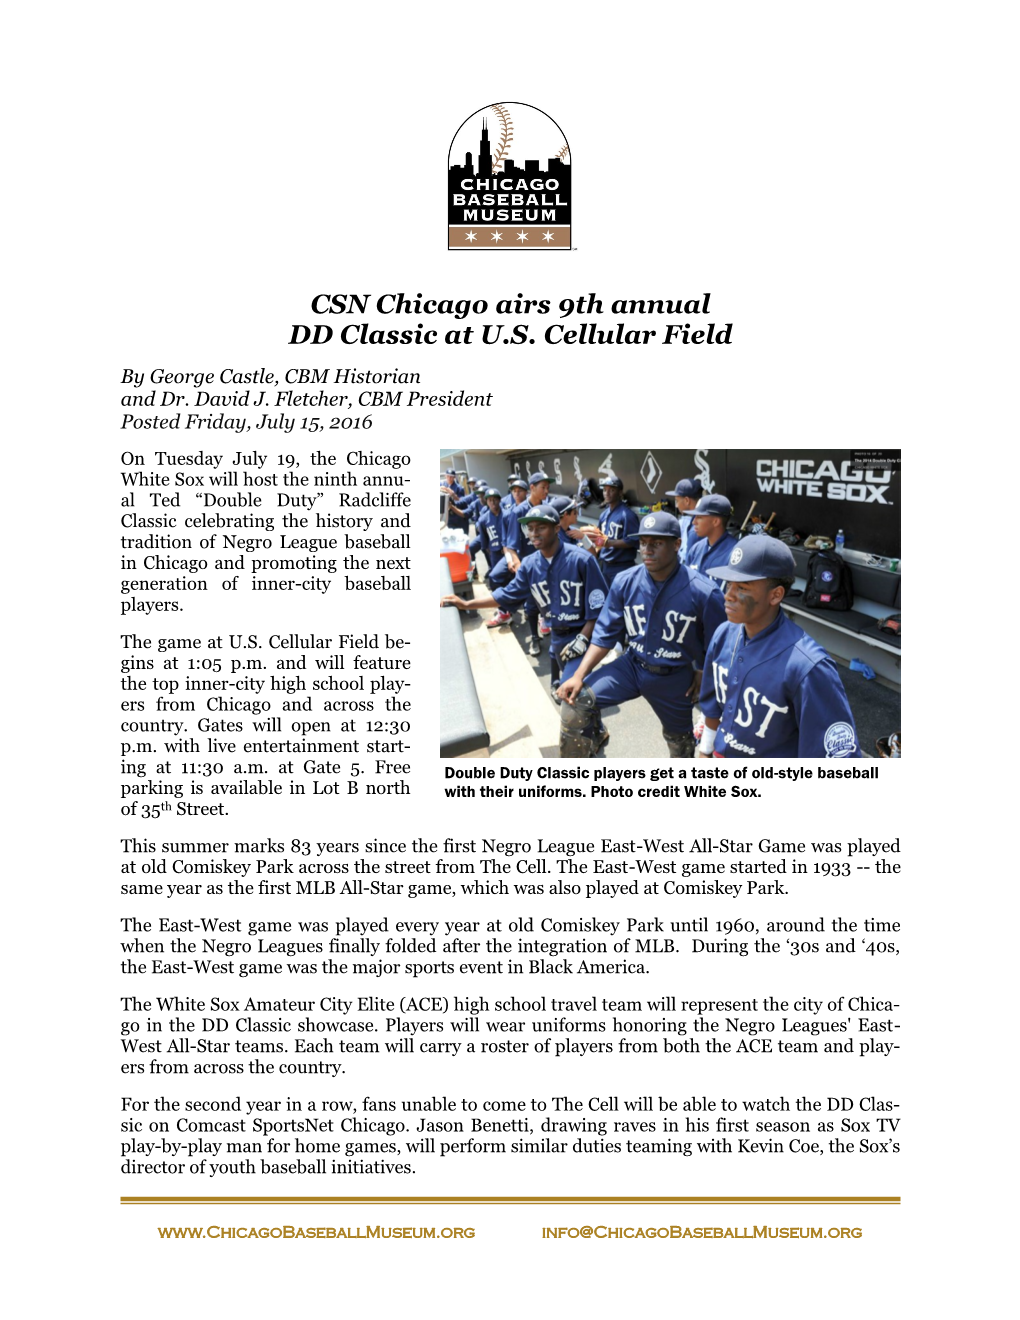 CSN Chicago Airs 9Th Annual DD Classic at U.S. Cellular Field by George Castle, CBM Historian and Dr